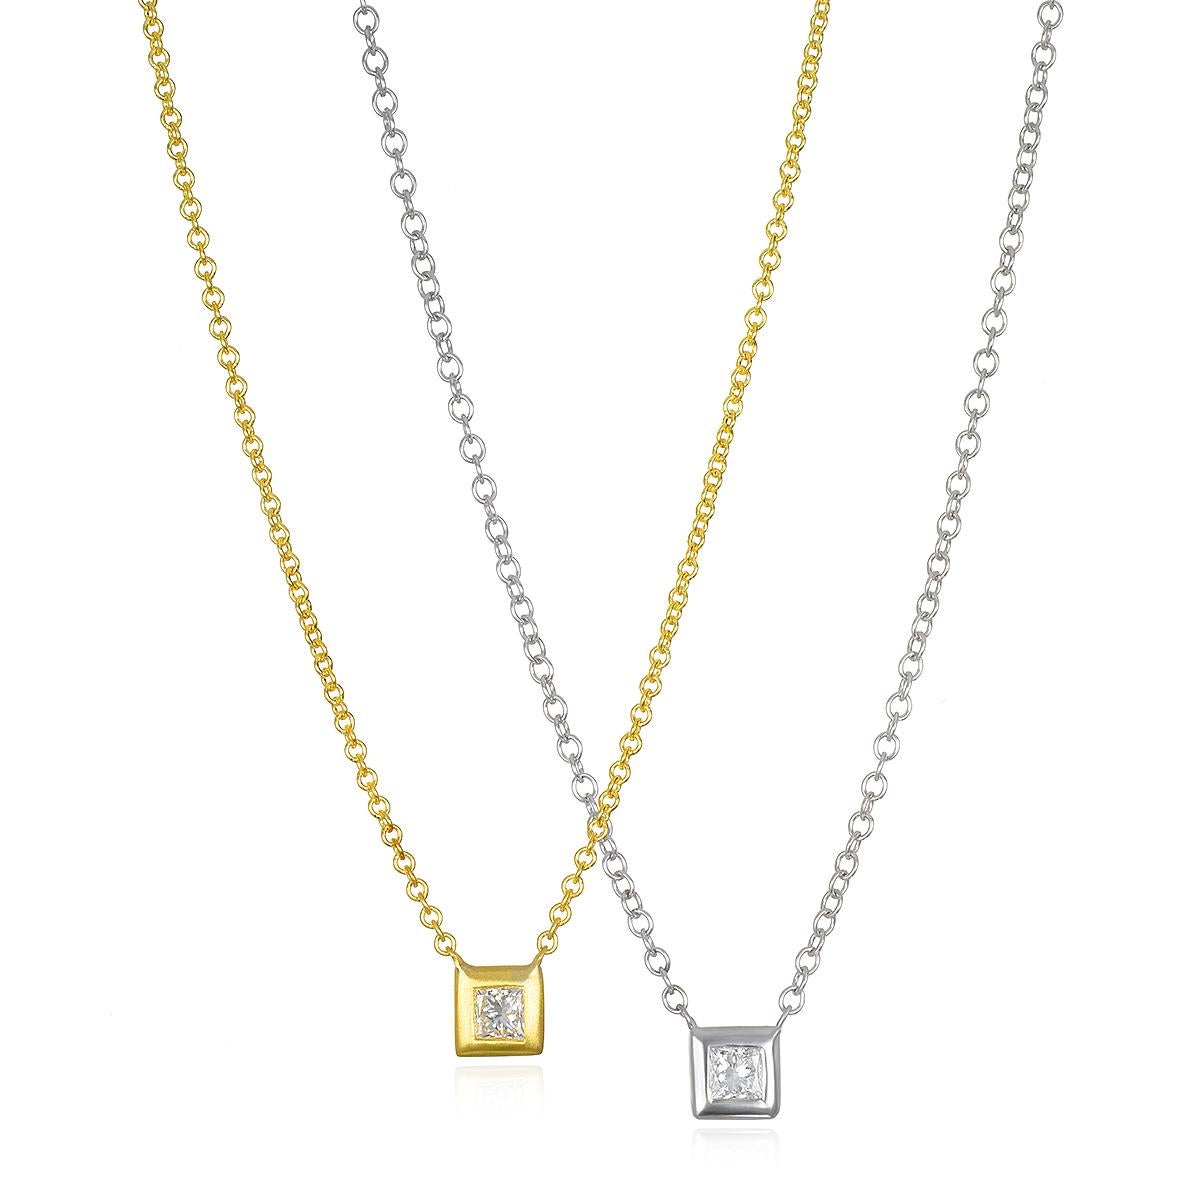 When you want just a bit of sparkle and pop, Faye Kim's Princess-cut diamond station necklace is the perfect solution. Bezel set in 18k white gold, bright finish. Wear alone or layer with longer, larger necklaces.

Diamond .11 Carats G/VS Quality -